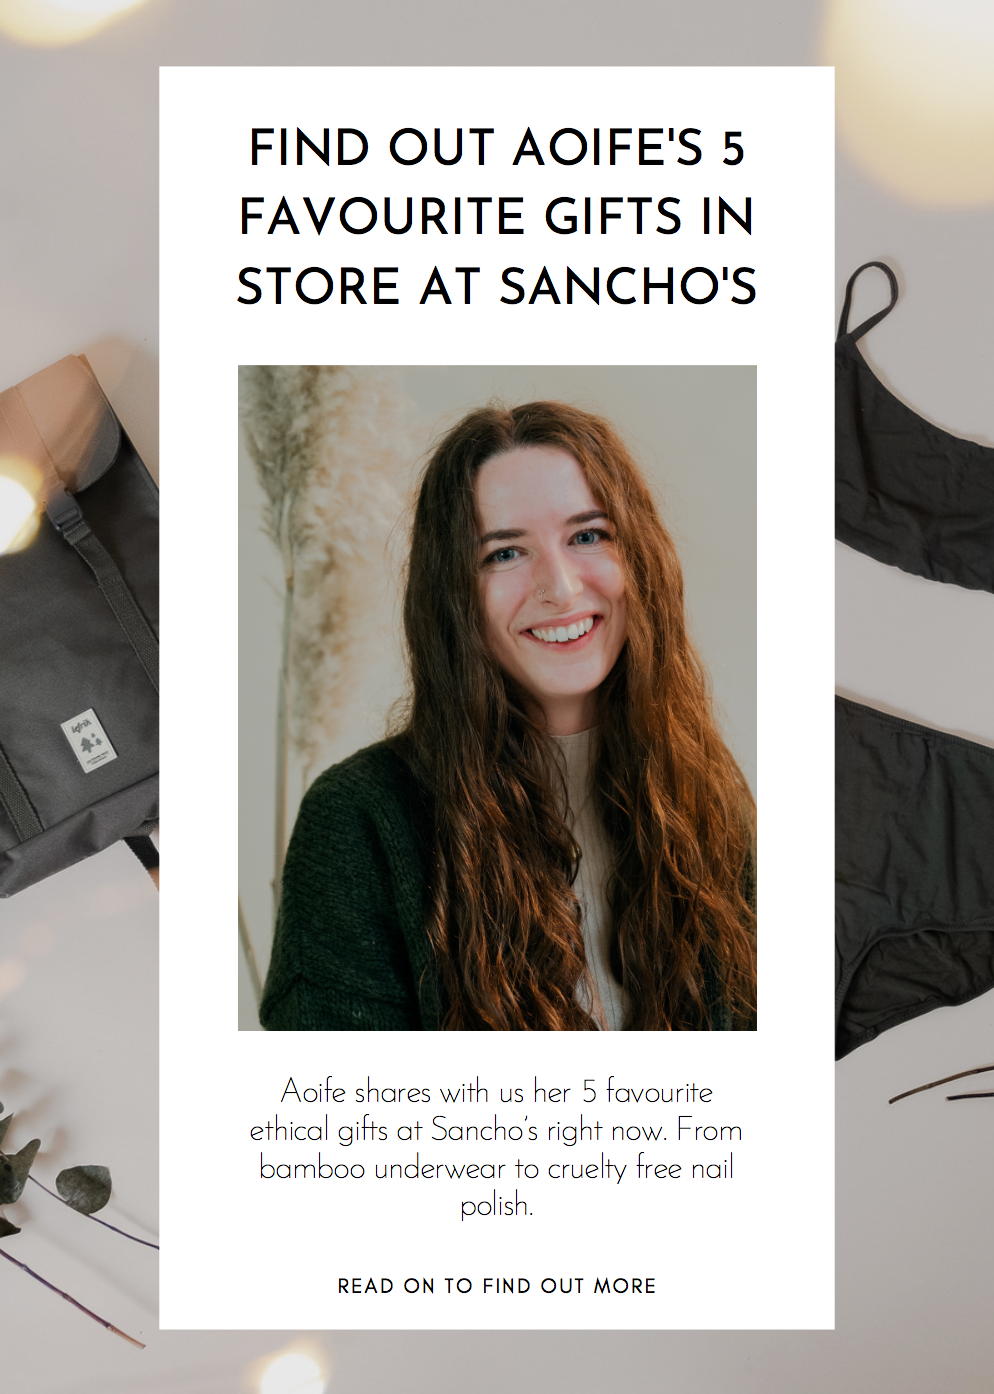 Find out Aoife’s 5 favourite gifts in store at Sancho’s